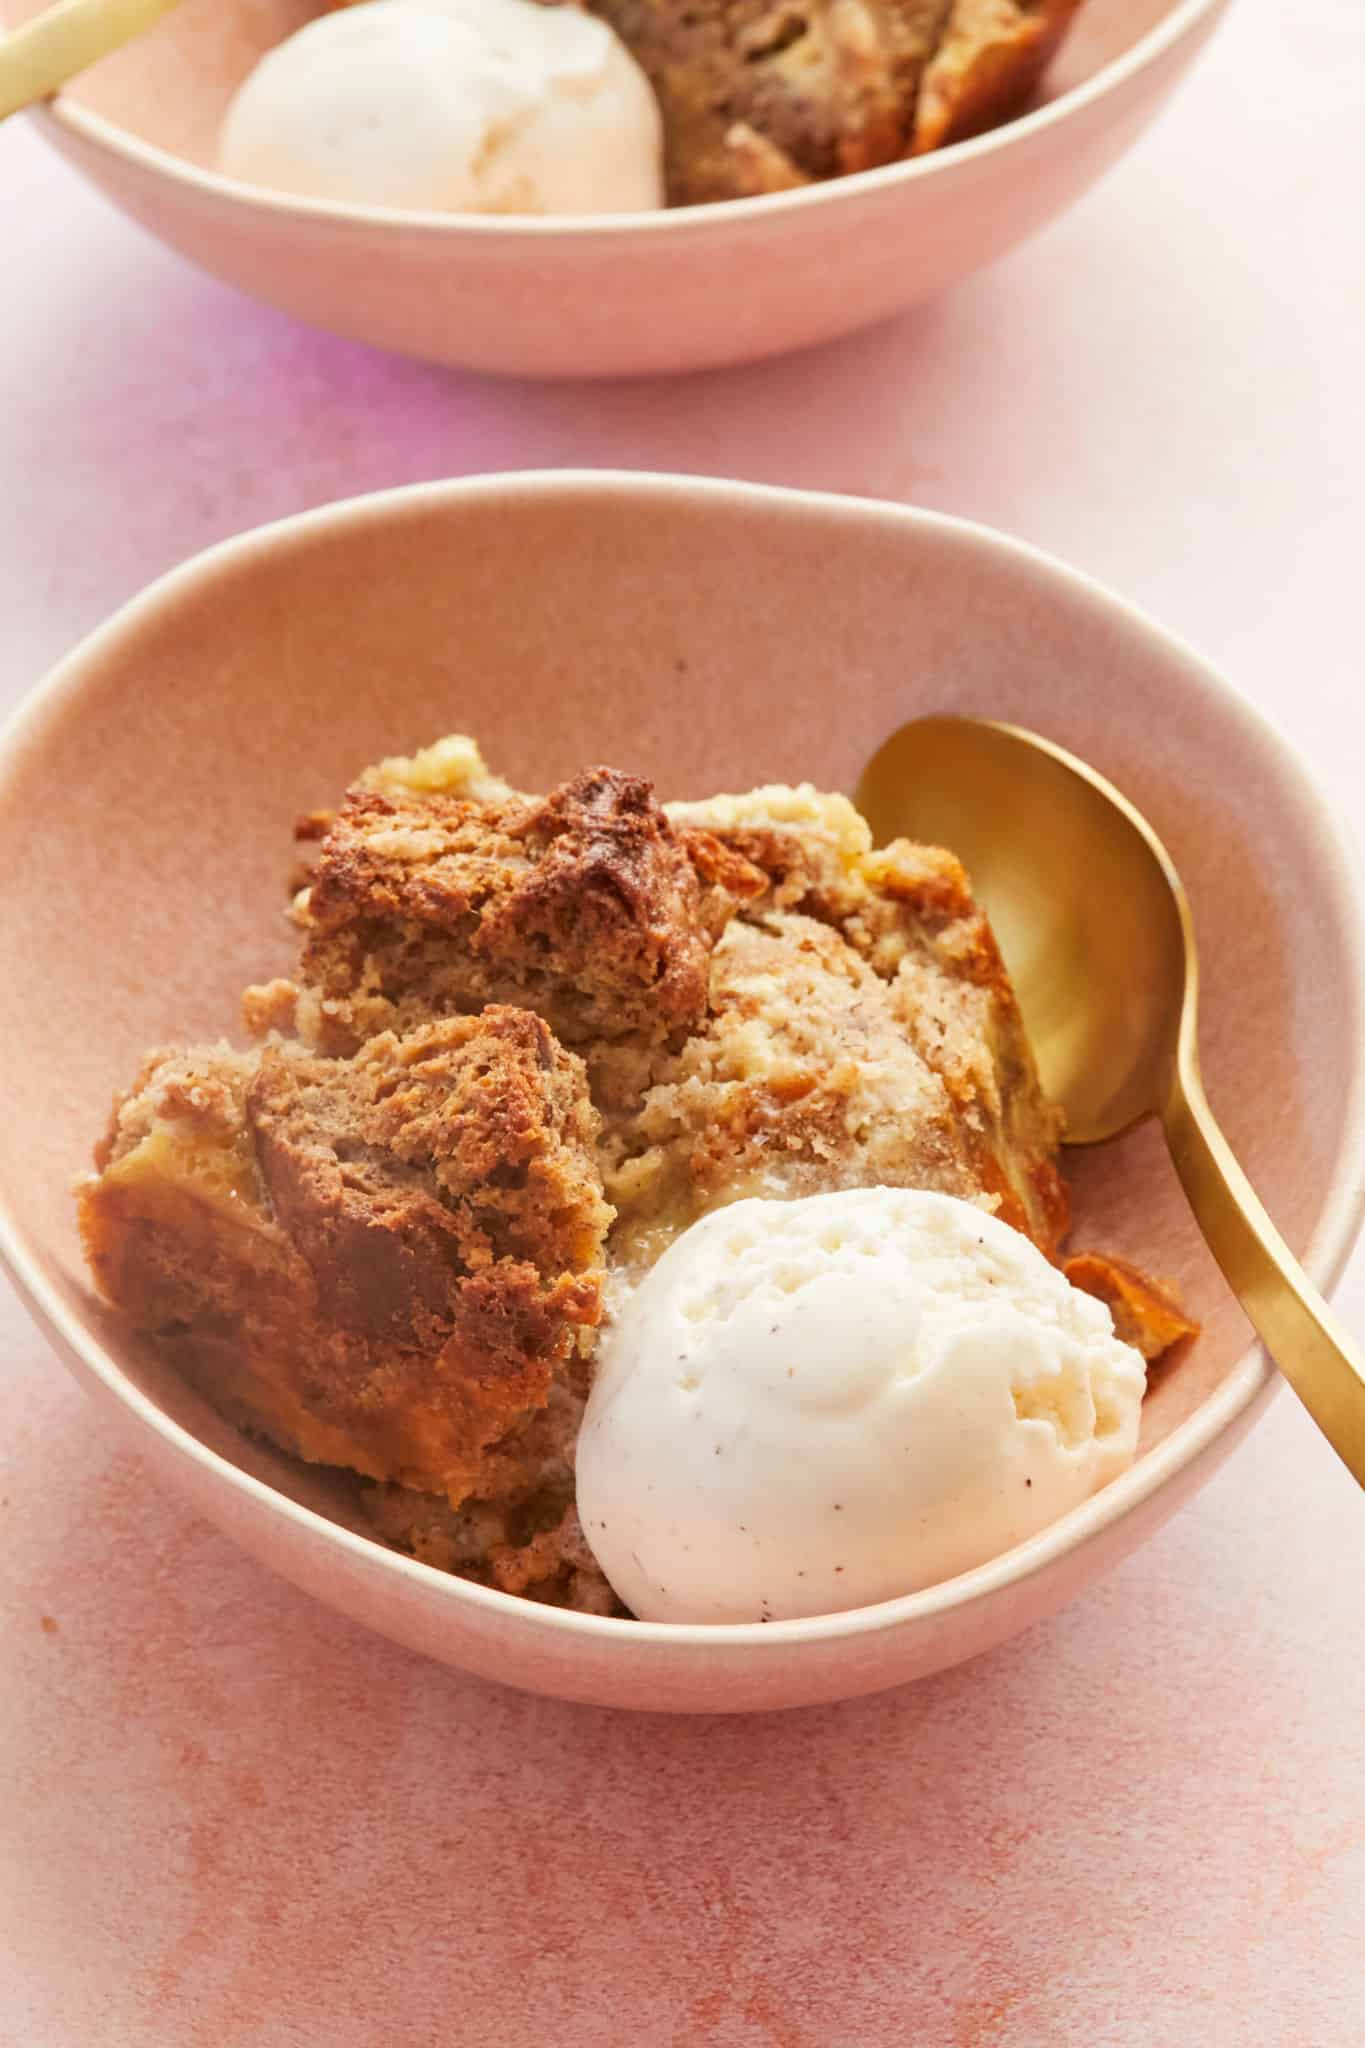 A dish of banana bread pudding with a scoop of vanilla ice cream.